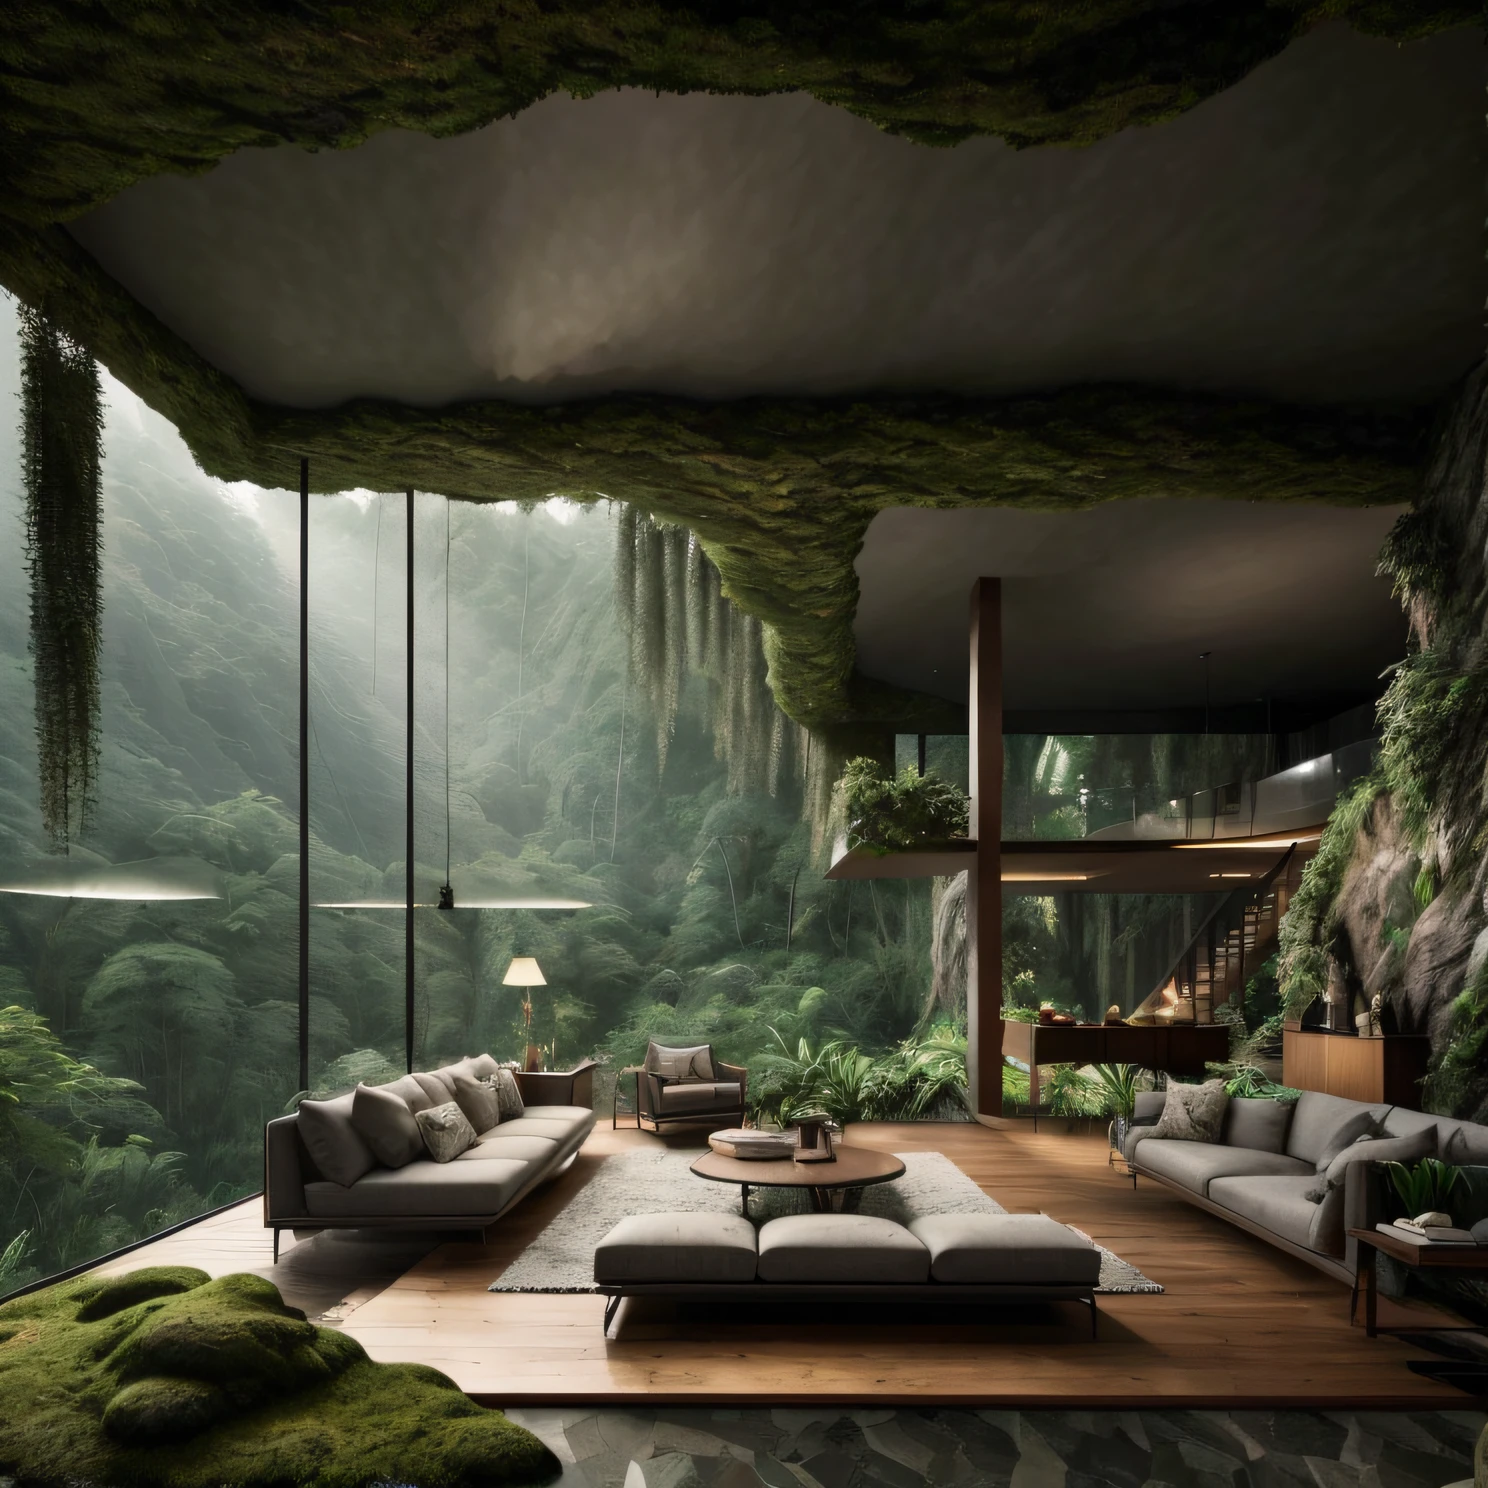 Living room with a large sofa and a table with a lamp, mountainous jungle setting, ambiente relaxante, beautiful render of a landscape, excellent 3d render, natureza encontra arquitetura, realistic fantasy rendering, magical atmosphere, jungle setting, Casa na floresta, integrado nas montanhas, arquitetura realista, construir em uma floresta perto de um lago, enscape render